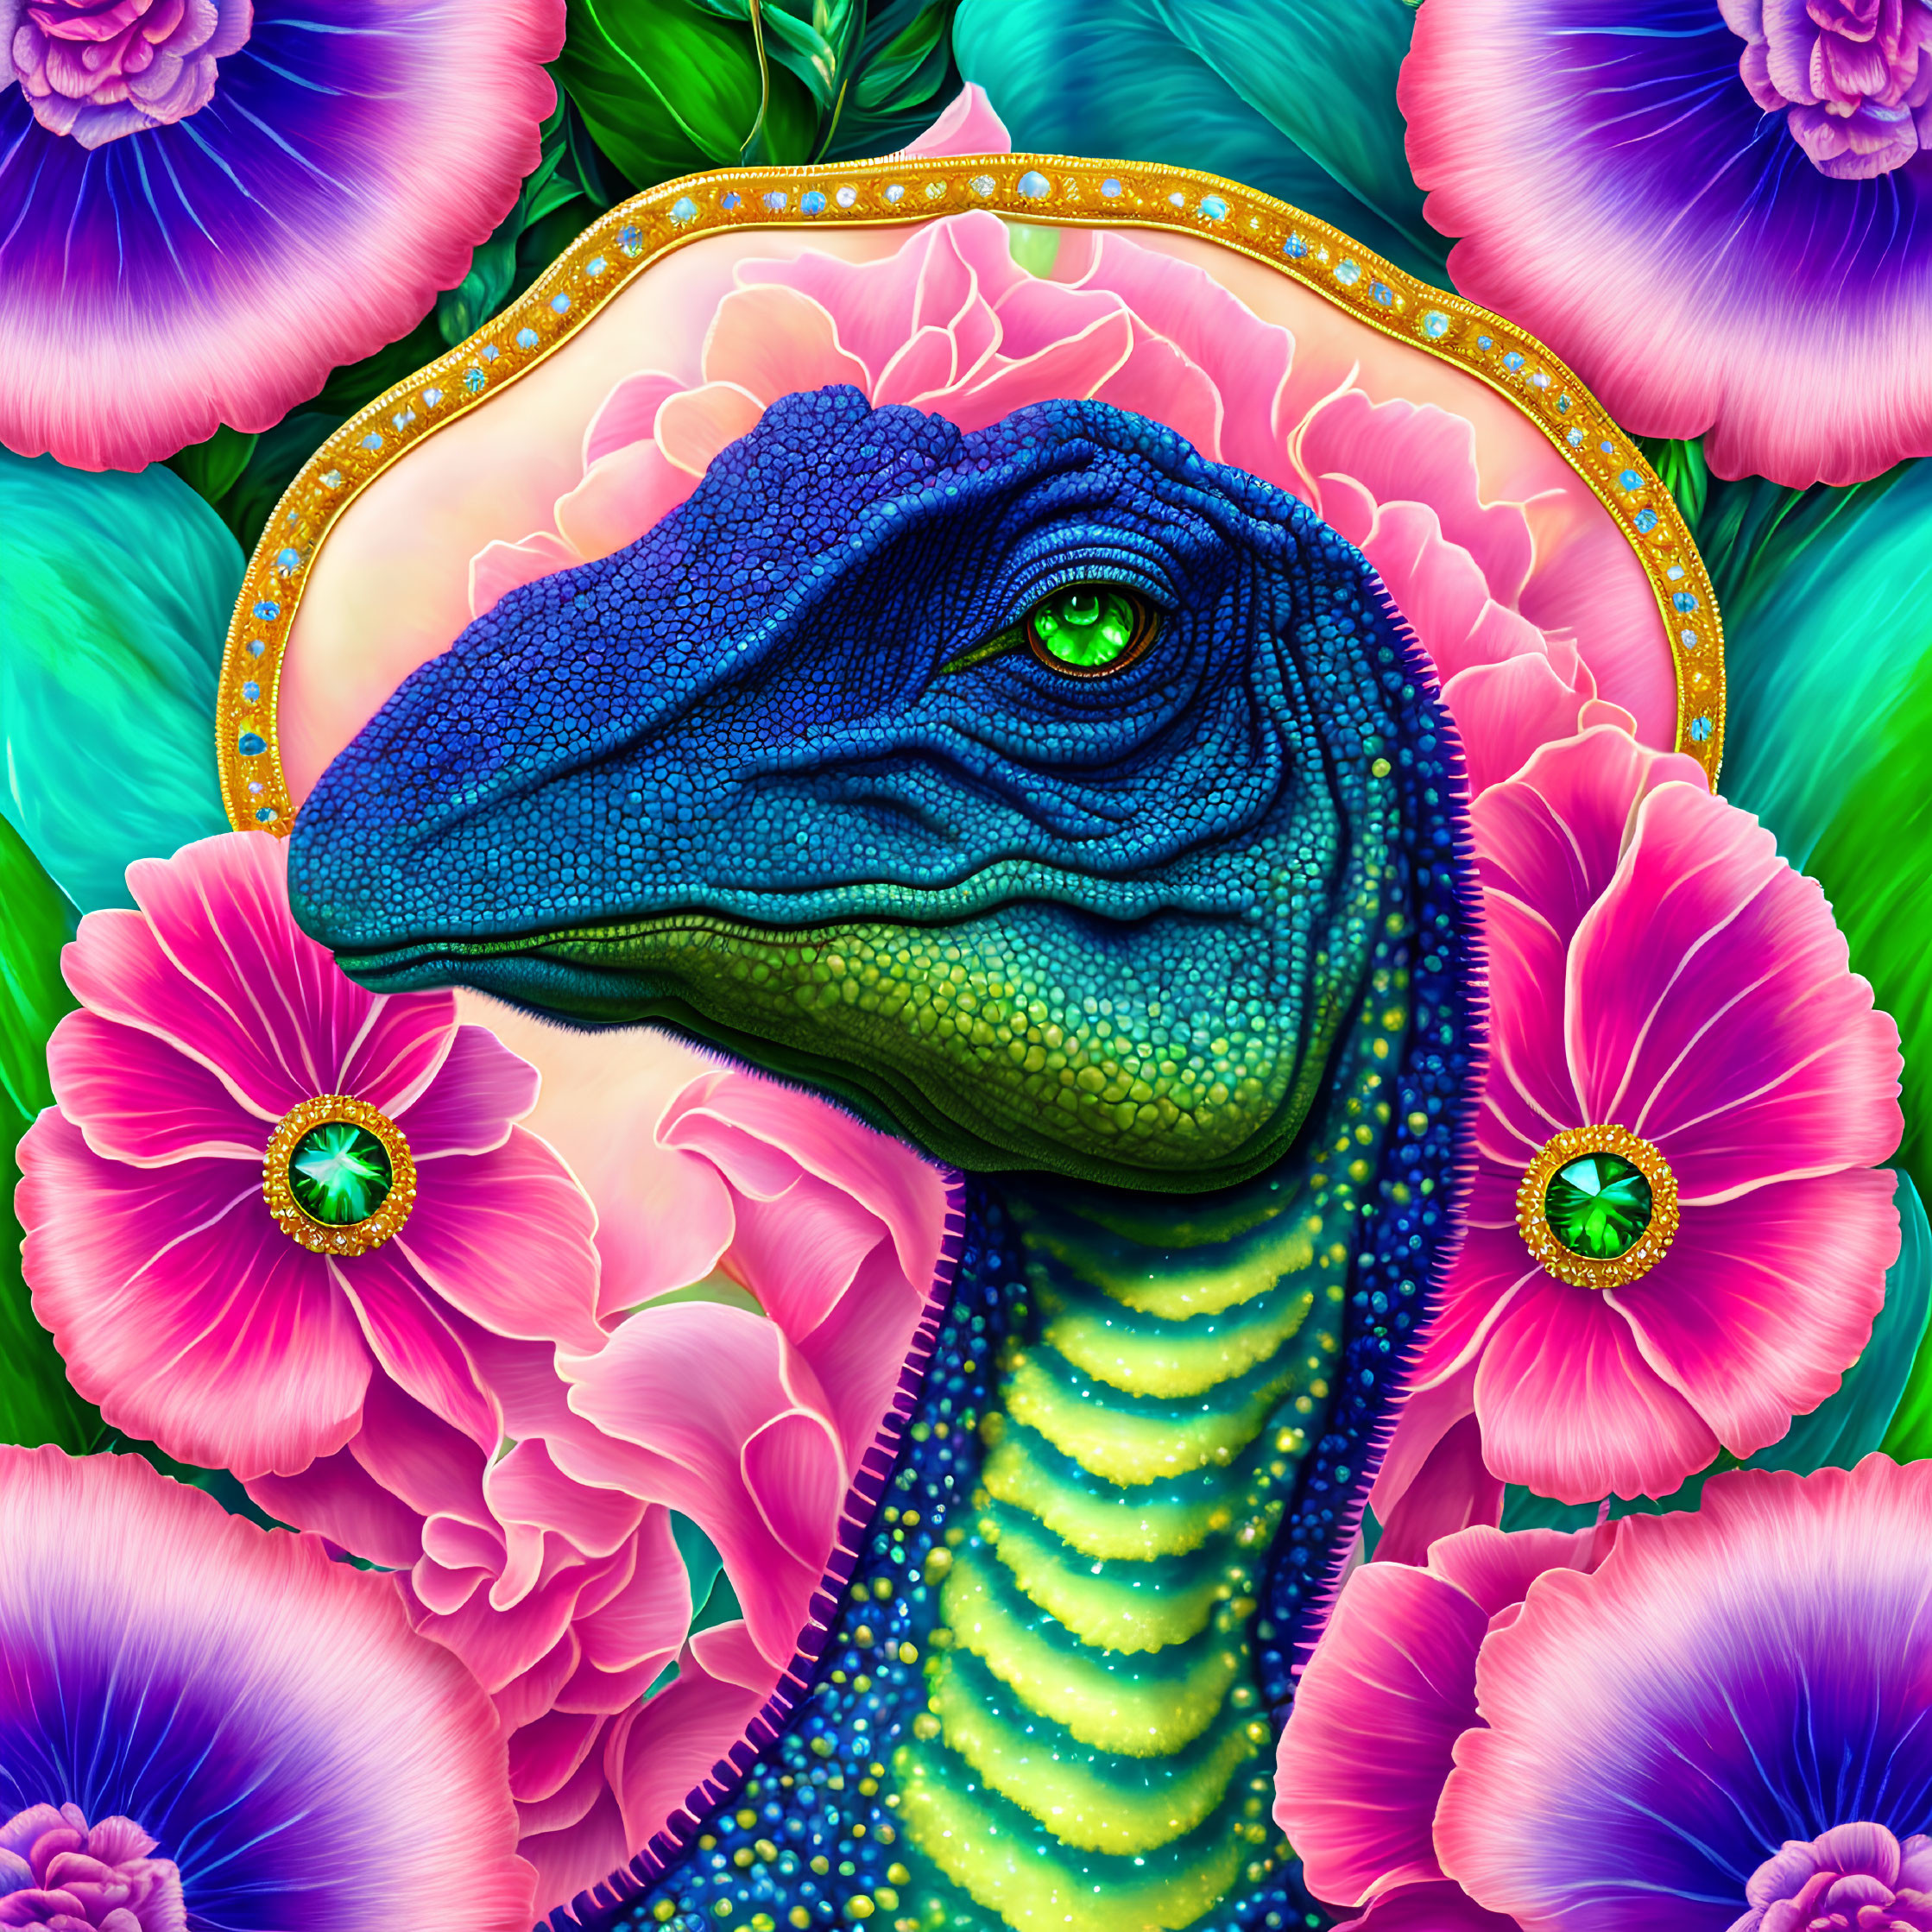 Colorful Blue Dinosaur Surrounded by Pink Flowers and Ornate Details